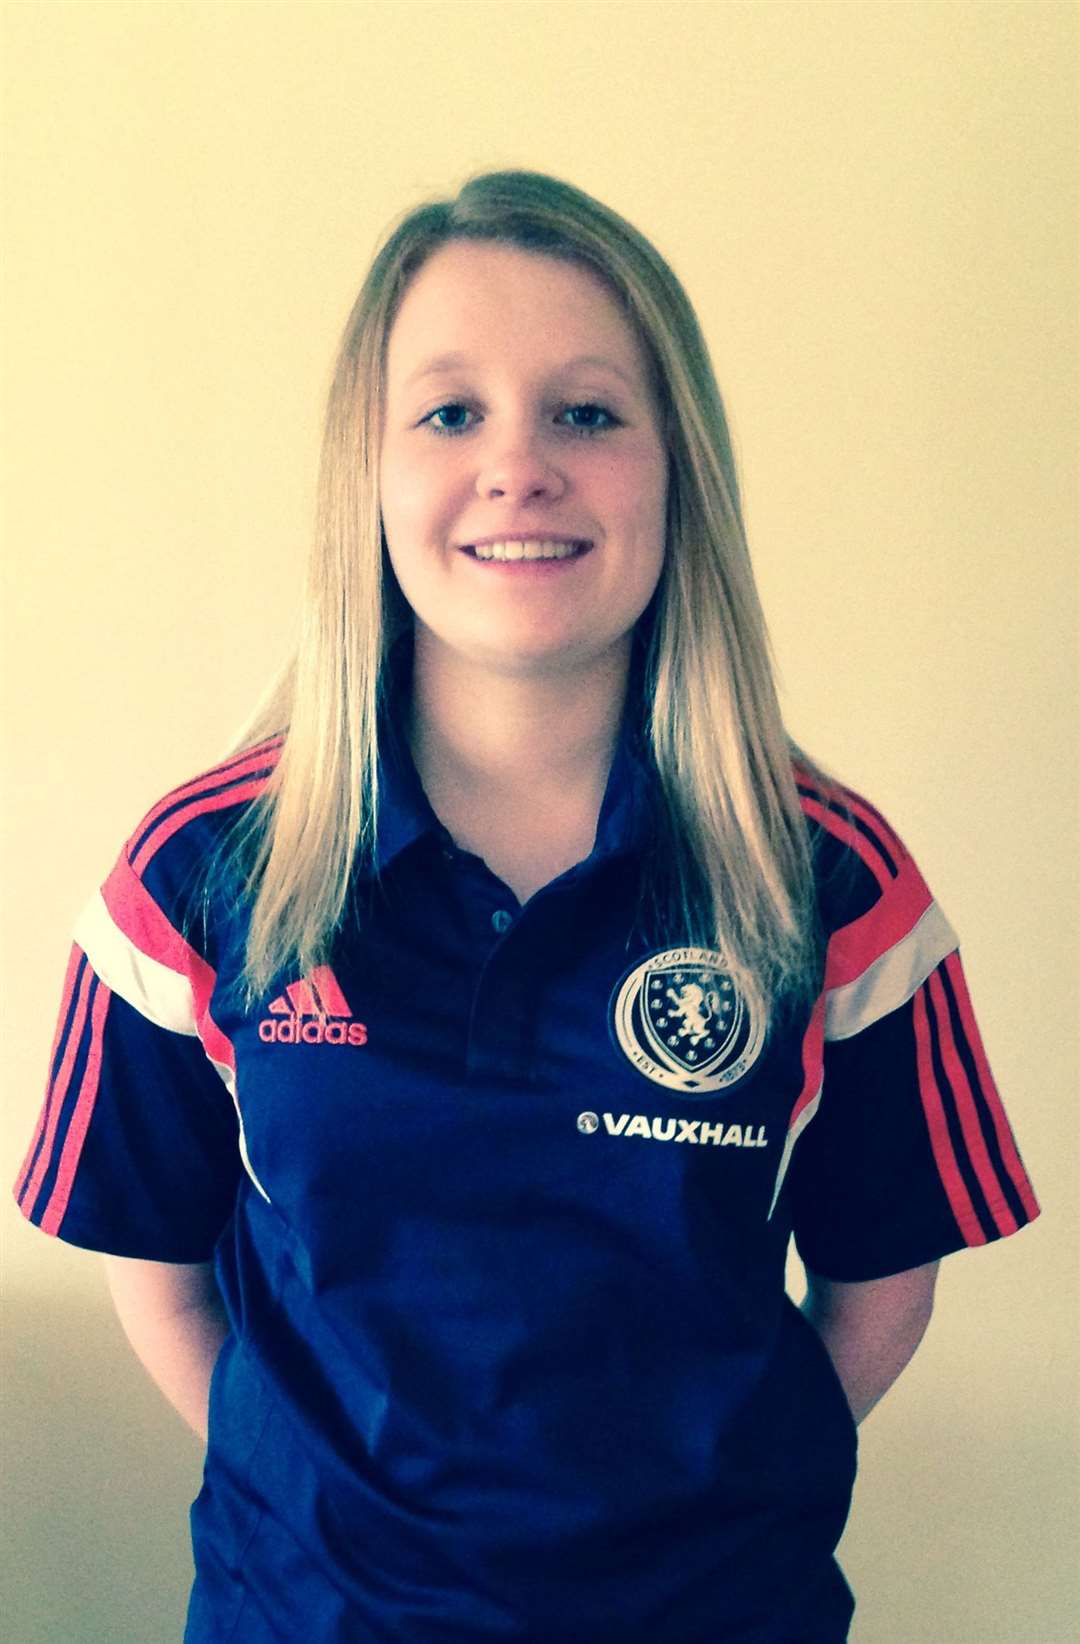 Joanne Murphy, Scottish FA Girls and Women's Club Development officer for the north region